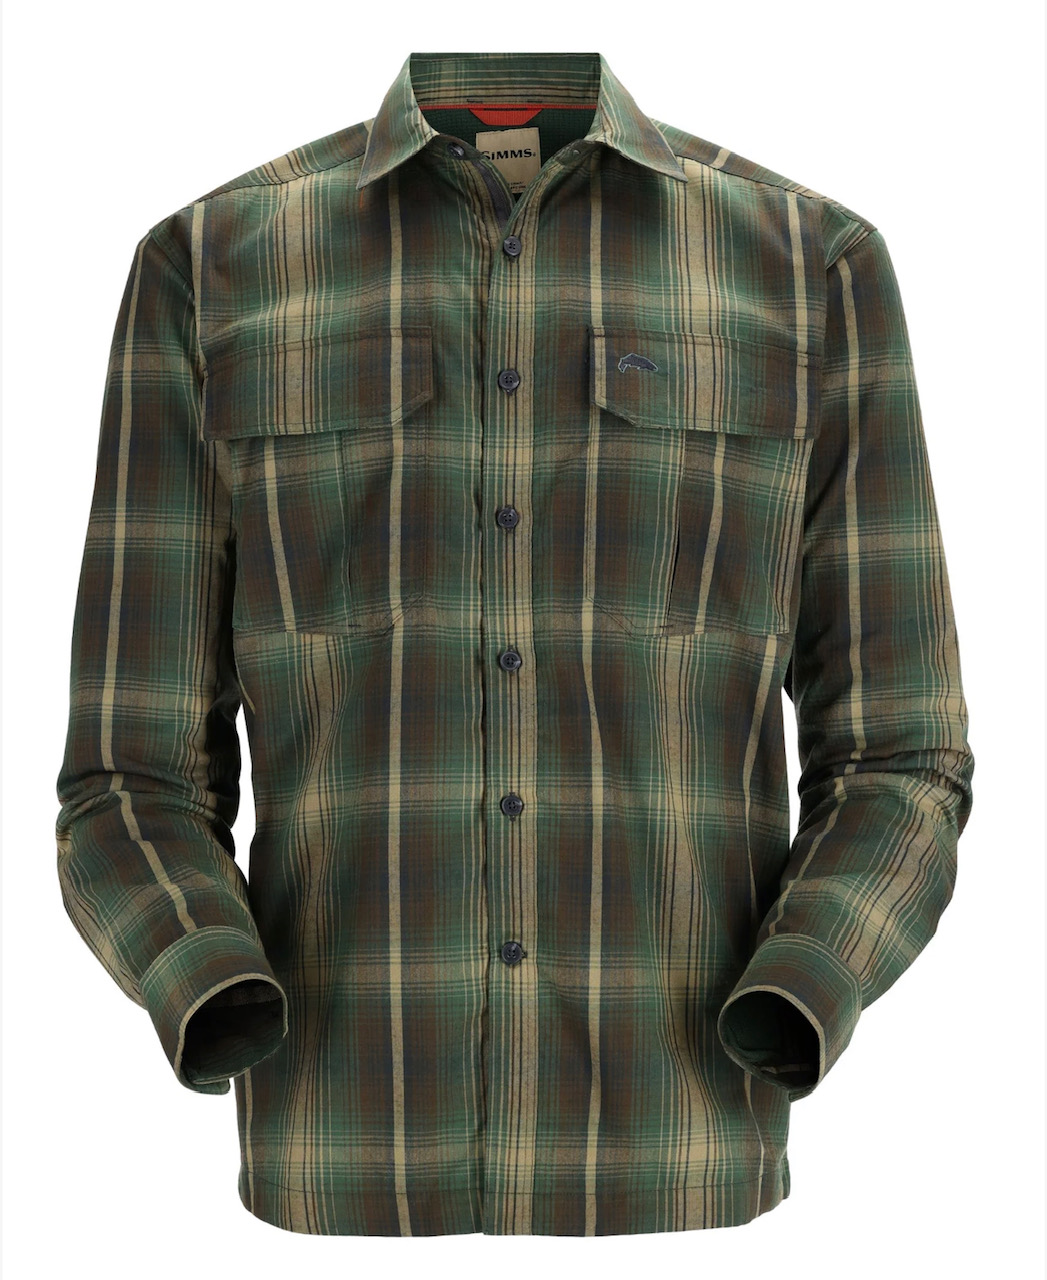 Simms M's Coldweather Shirt - Forest Hickory Plaid - XXL